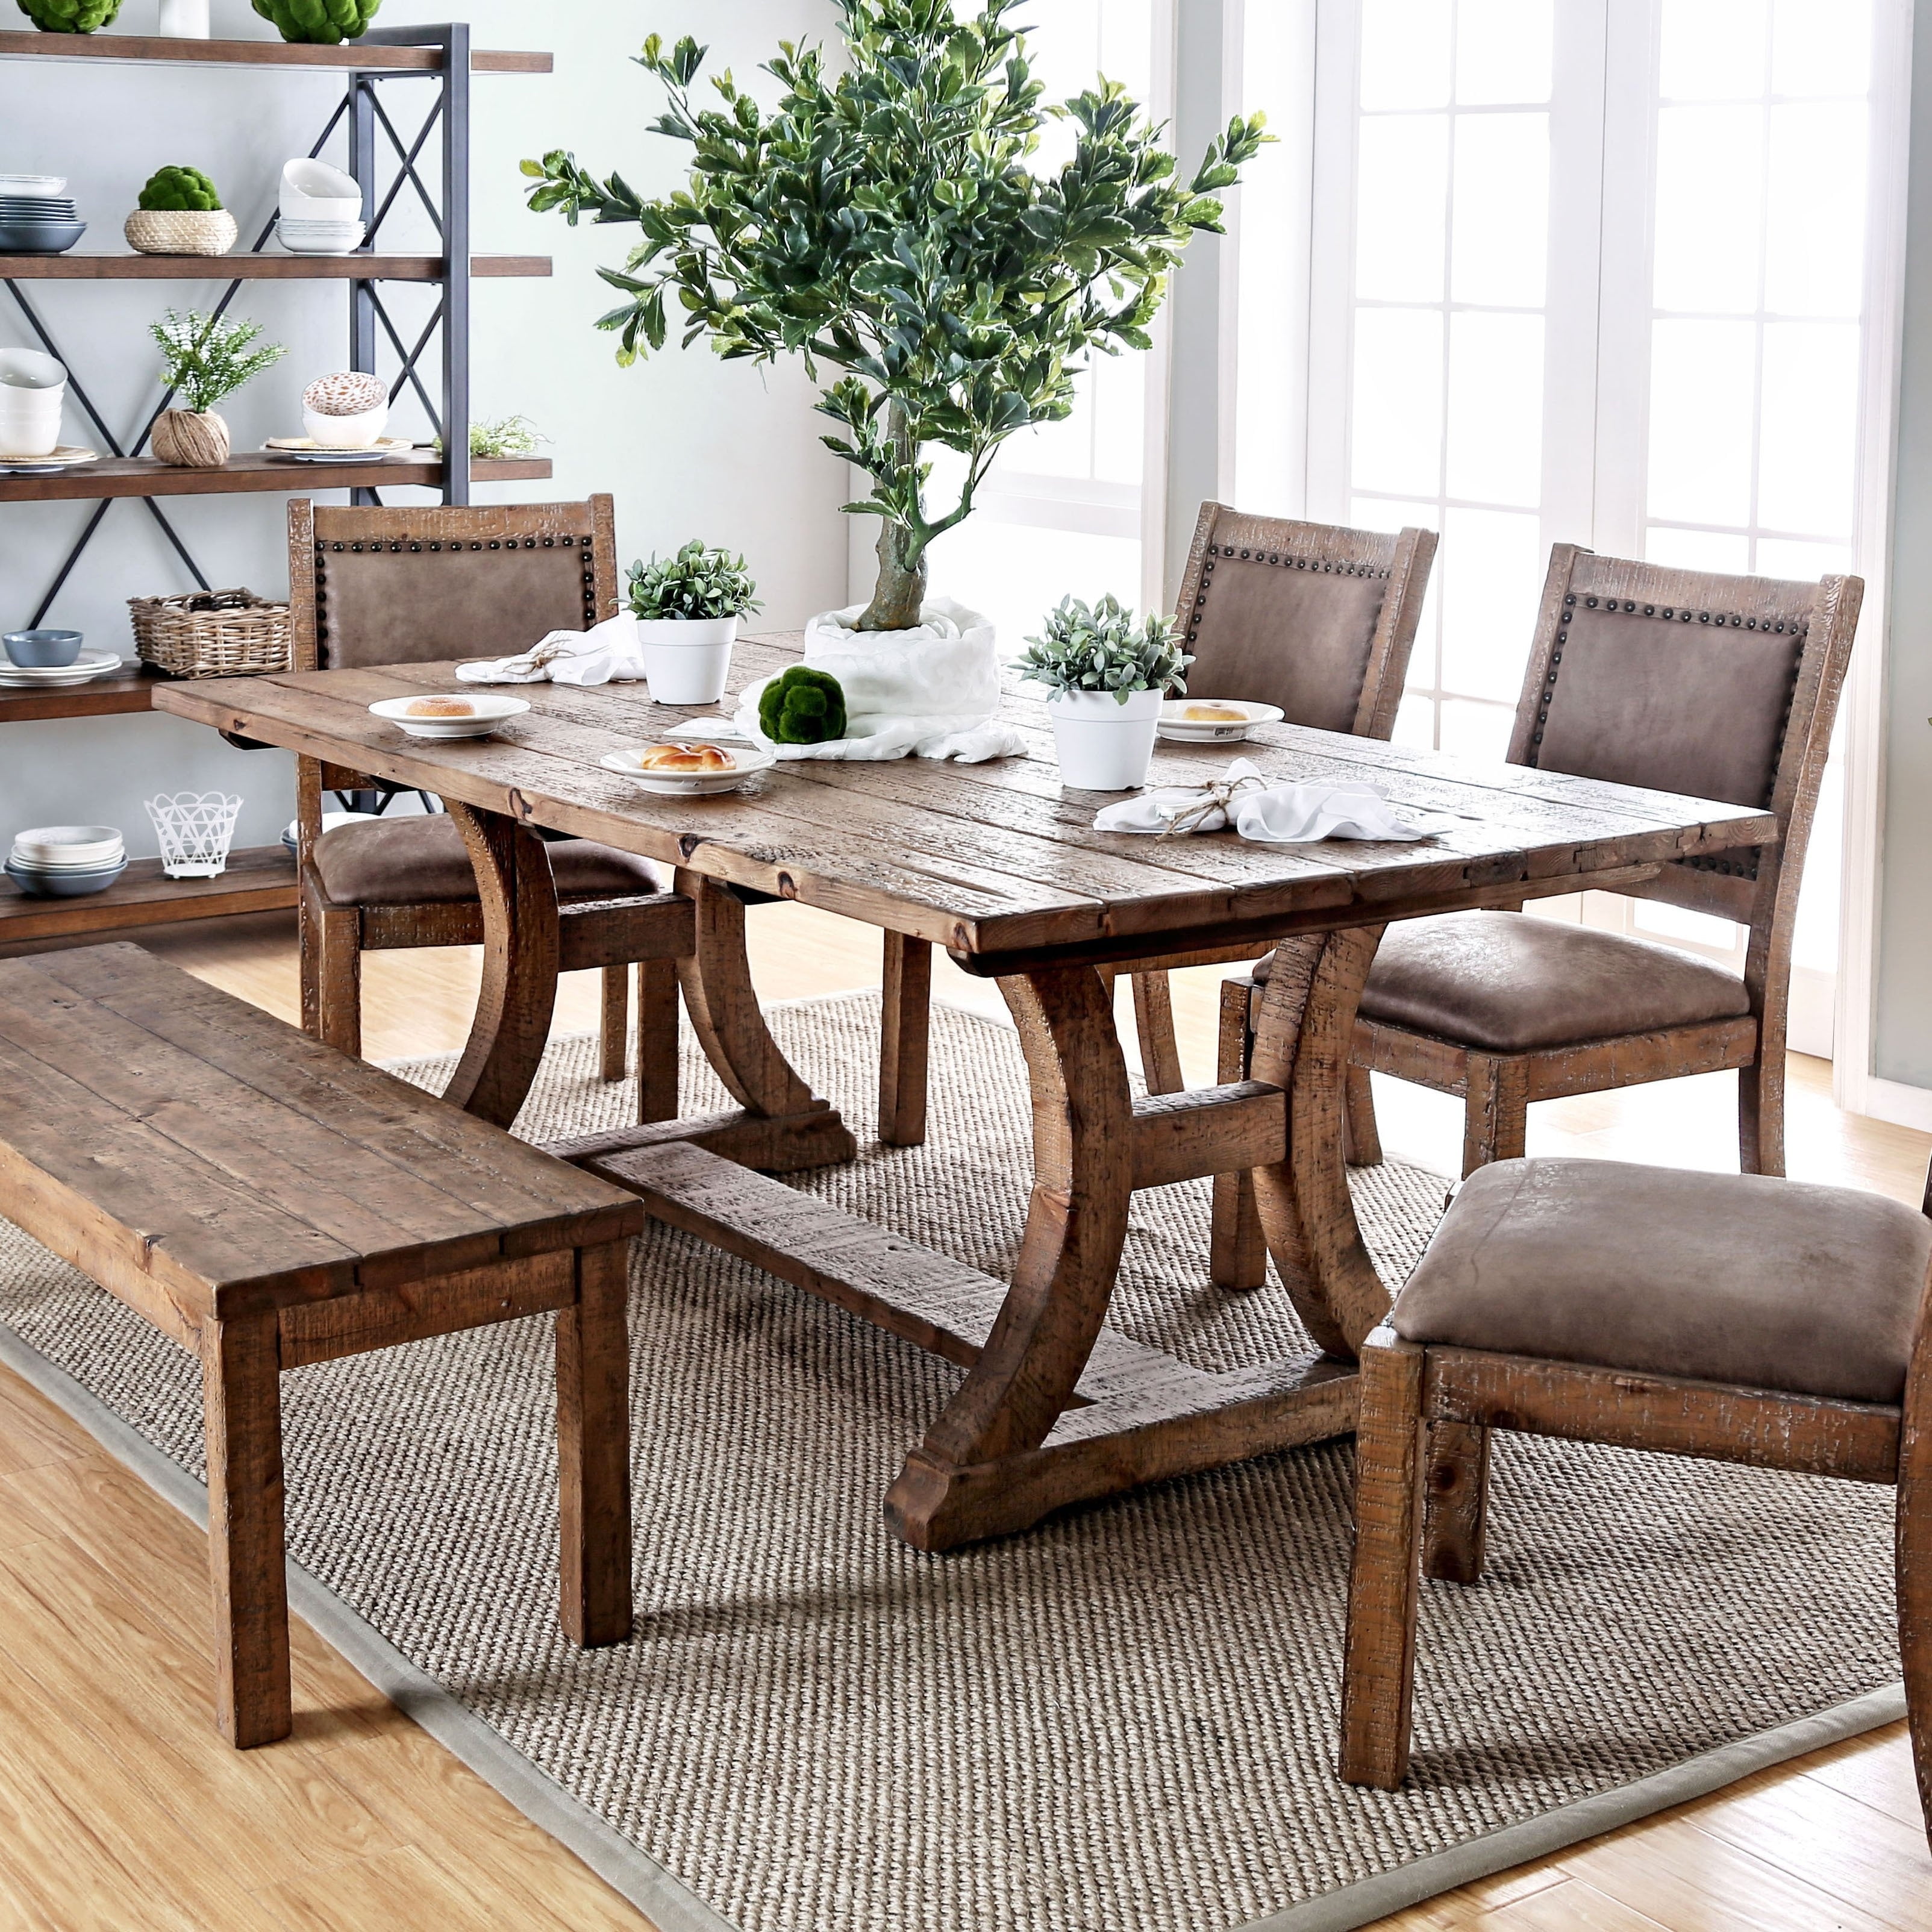 Furniture of America Sail Rustic Pine Solid Wood Dining Table - Walmart